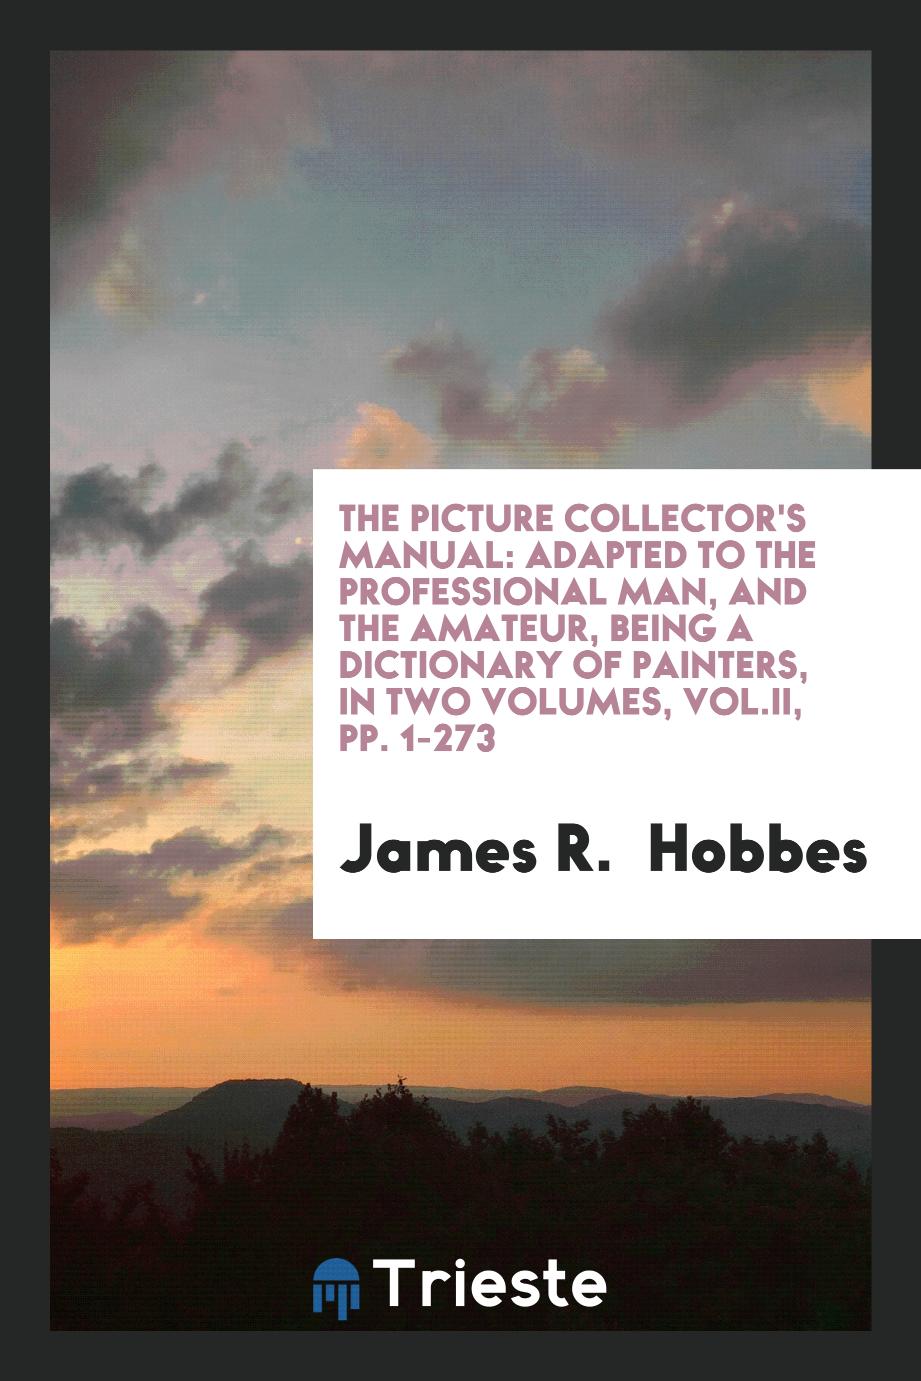 The Picture Collector's Manual: Adapted to the Professional Man, and the Amateur, Being a Dictionary of Painters, In Two Volumes, Vol.II, pp. 1-273